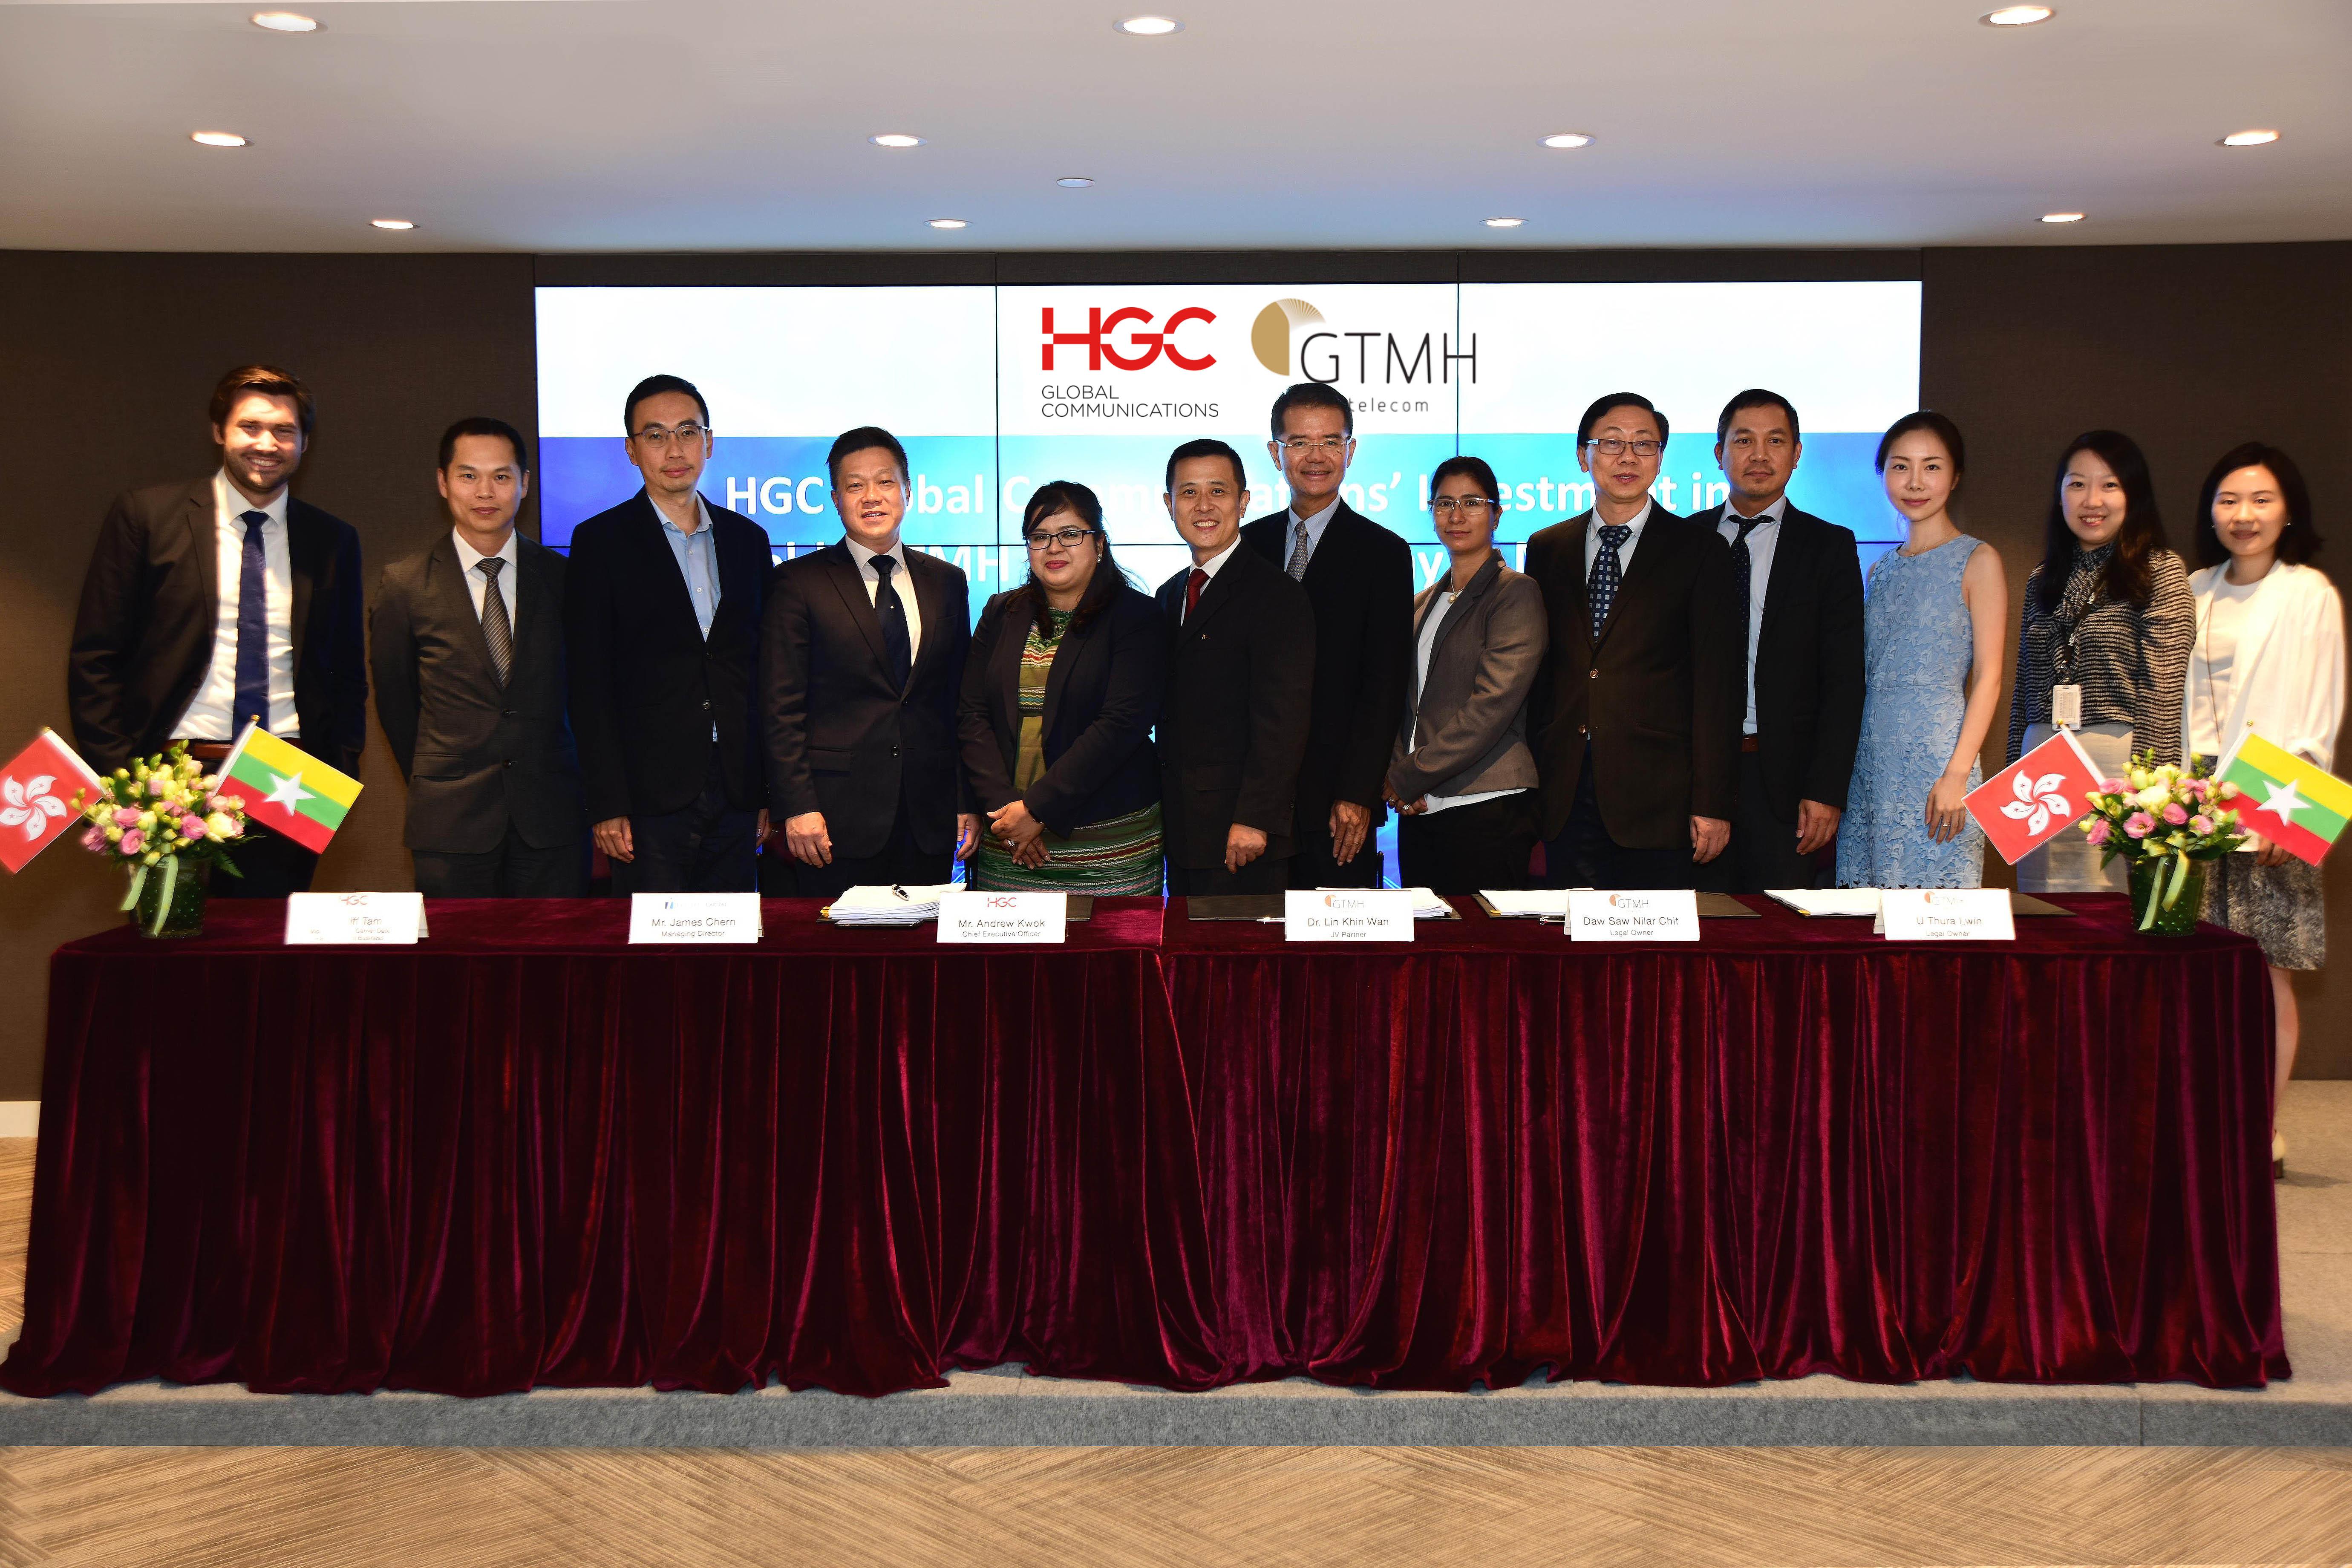 Hgc Acquires A Majority Stake In Gtmh A Leading Network Service Provider In Myanmar Edited